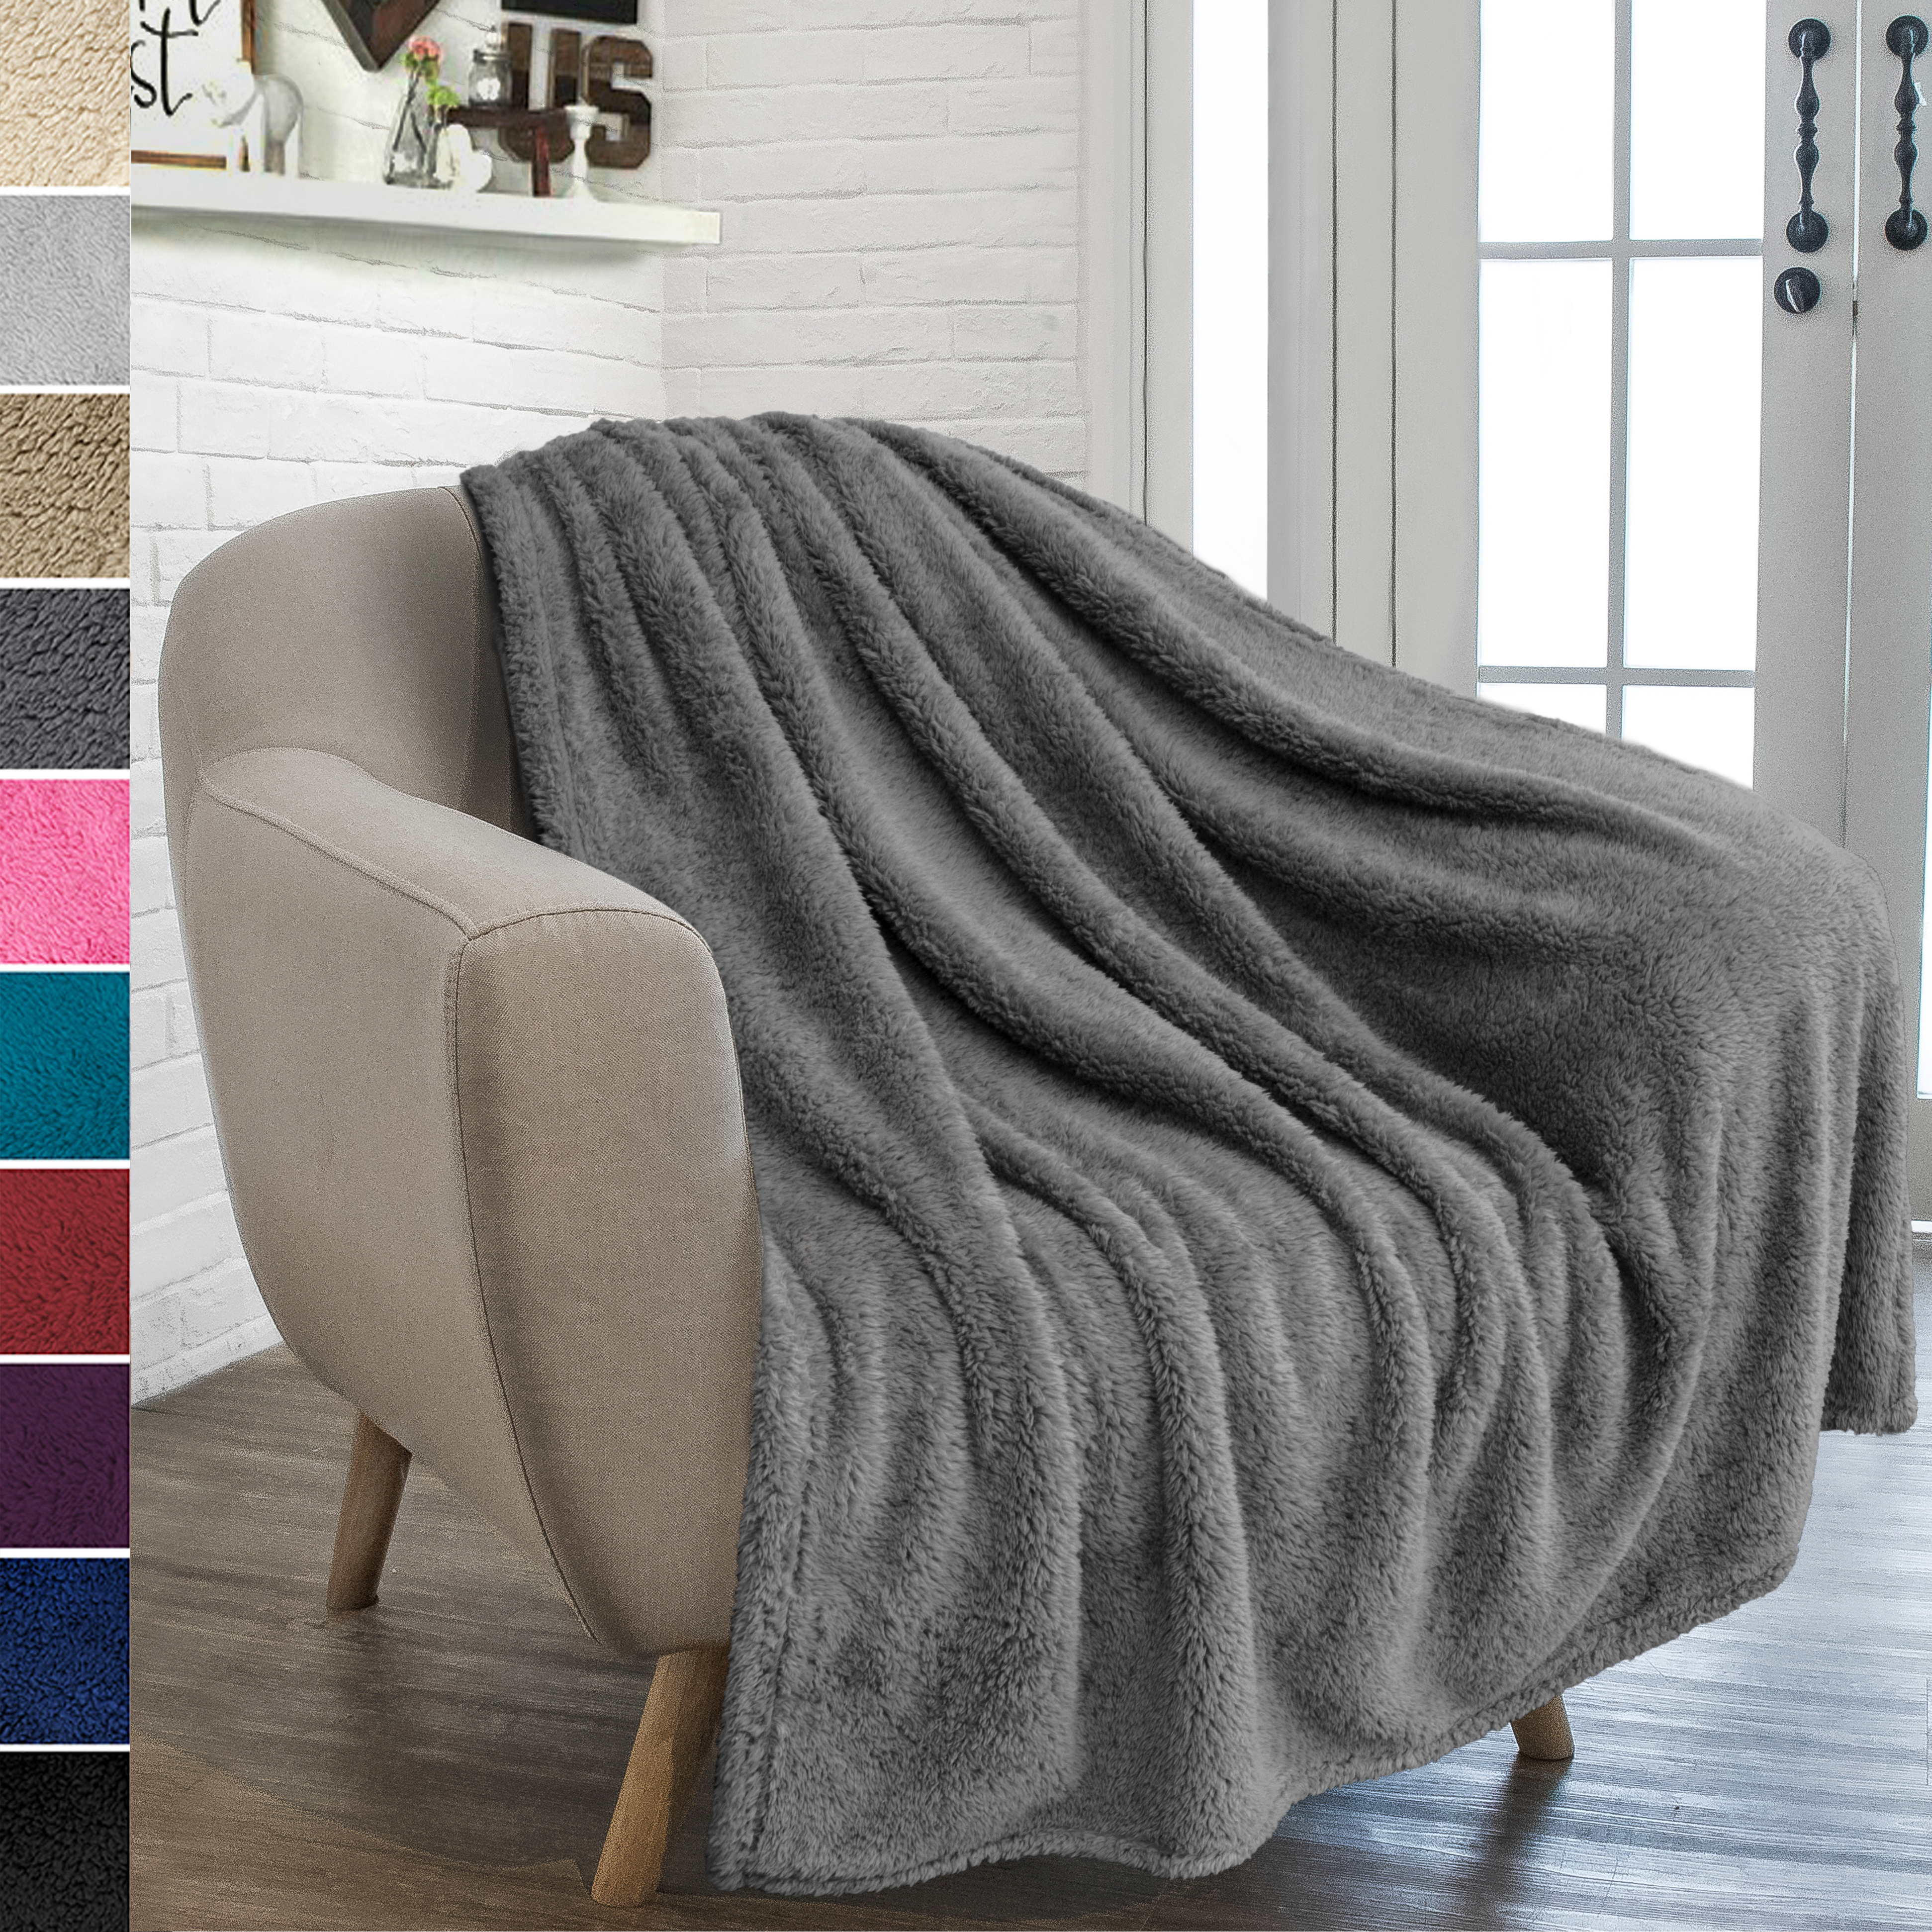 Fuzzy Soft Fleece Throw Blanket for Couch Sofa Bed Chair Microfiber Cozy Sherpa 